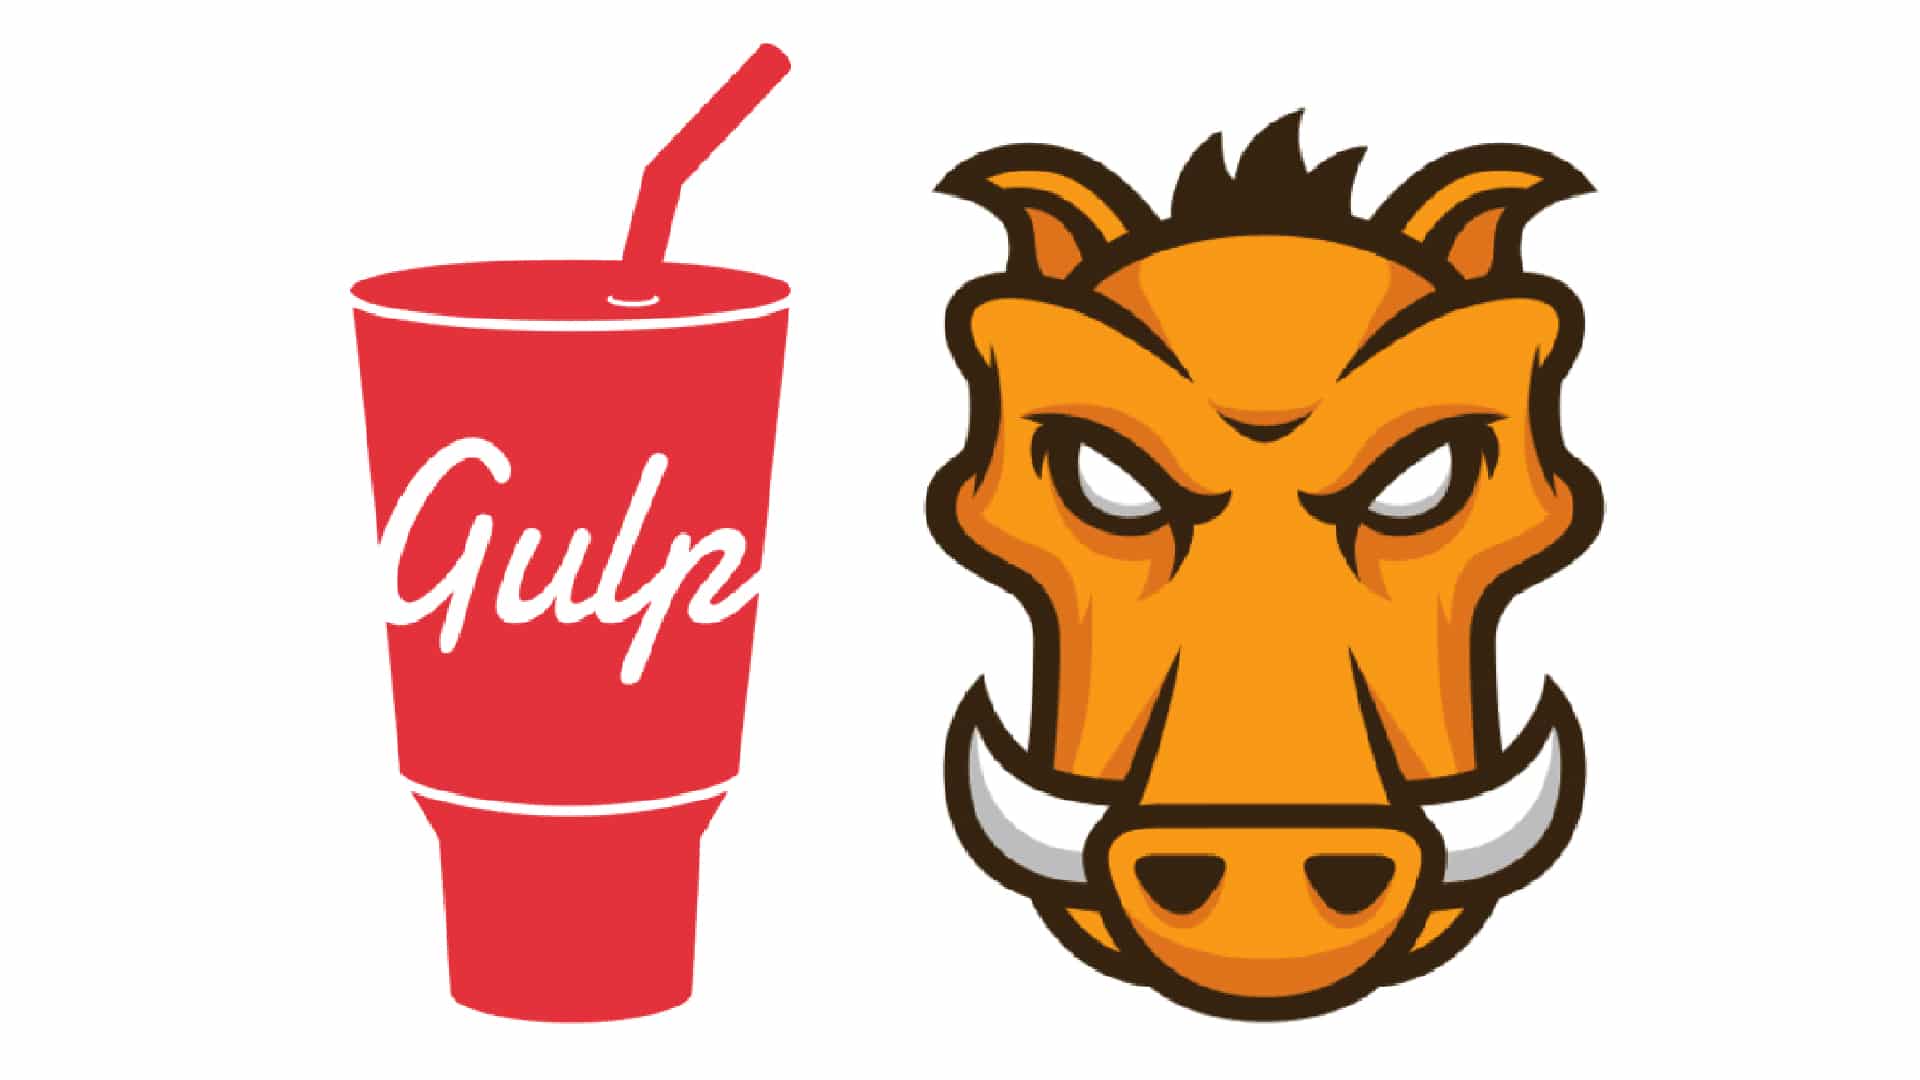 Setting Up Gulp Tasks for the First Time